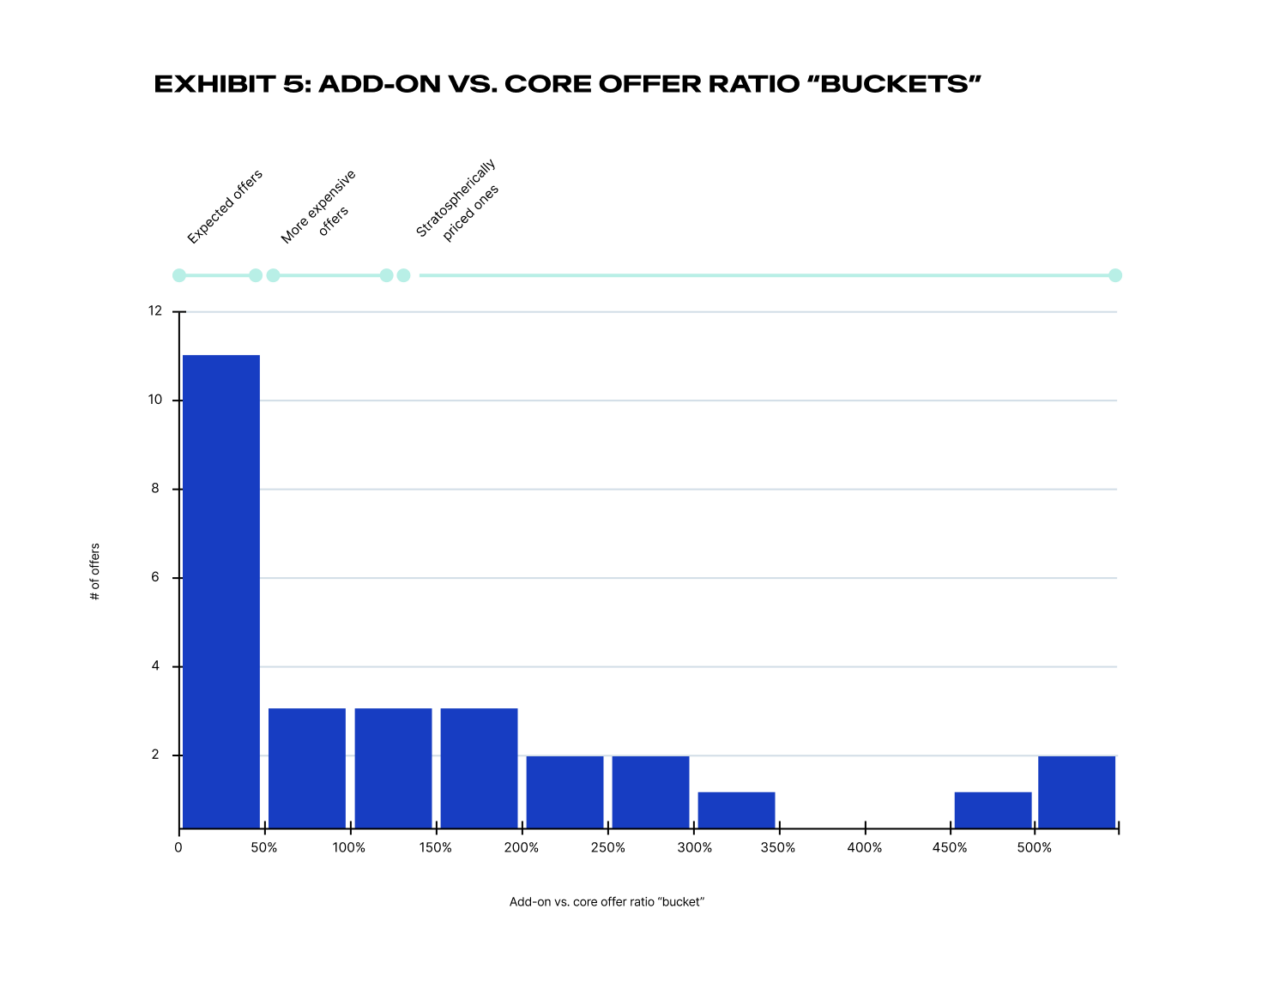 Bar graph and line plot displaying the "Add-On vs. Core Offer Ratio 'Buckets'" with ratios on the x-axis and values on the y-axis, labeled from Exhibit 5.